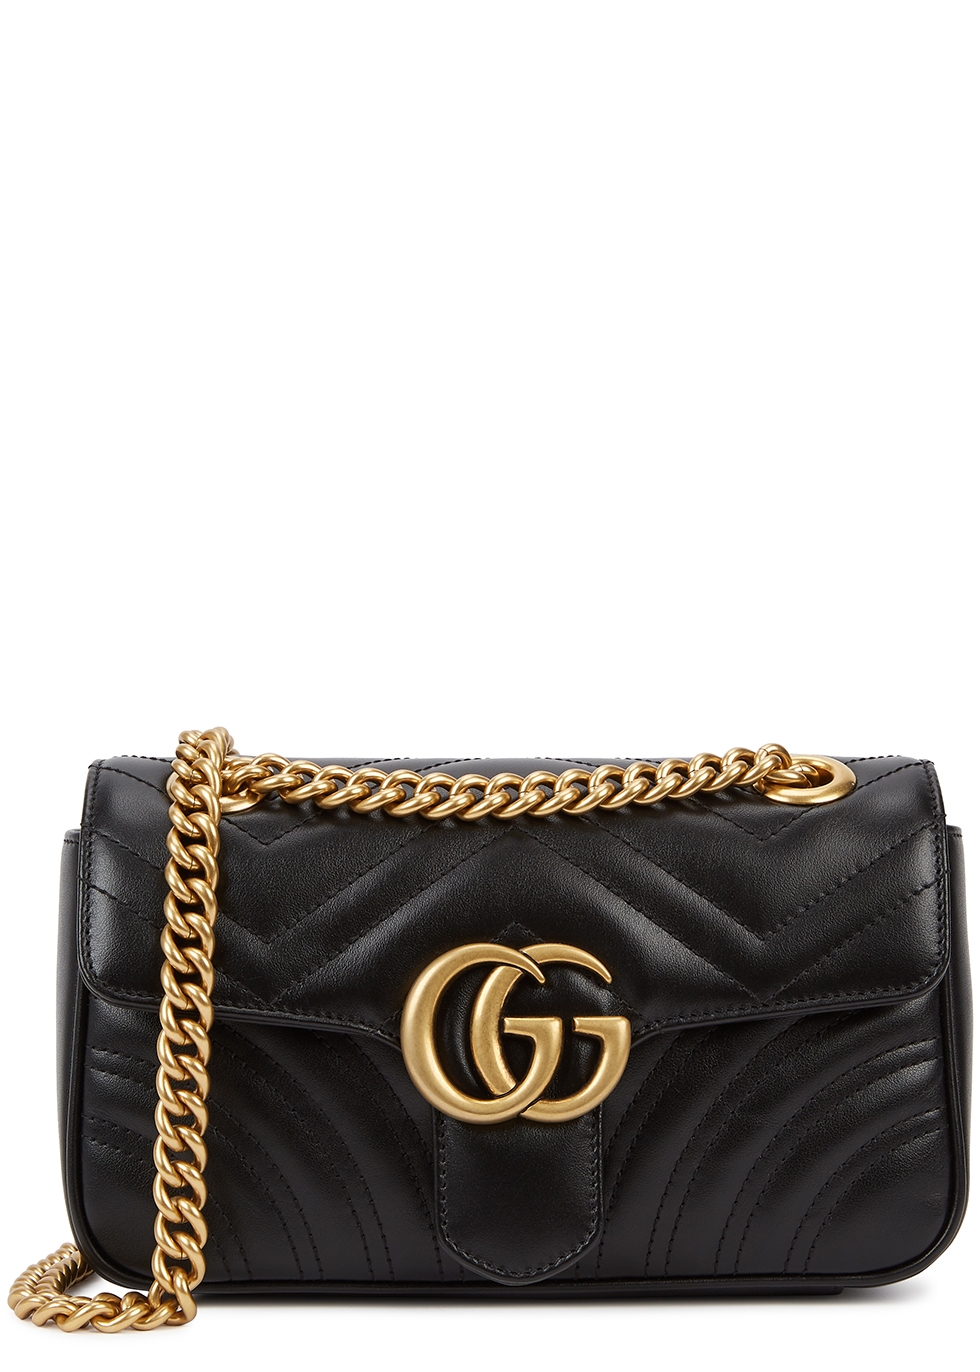 Sale - Women's Gucci Bags ideas: at $230.00+ | Stylight